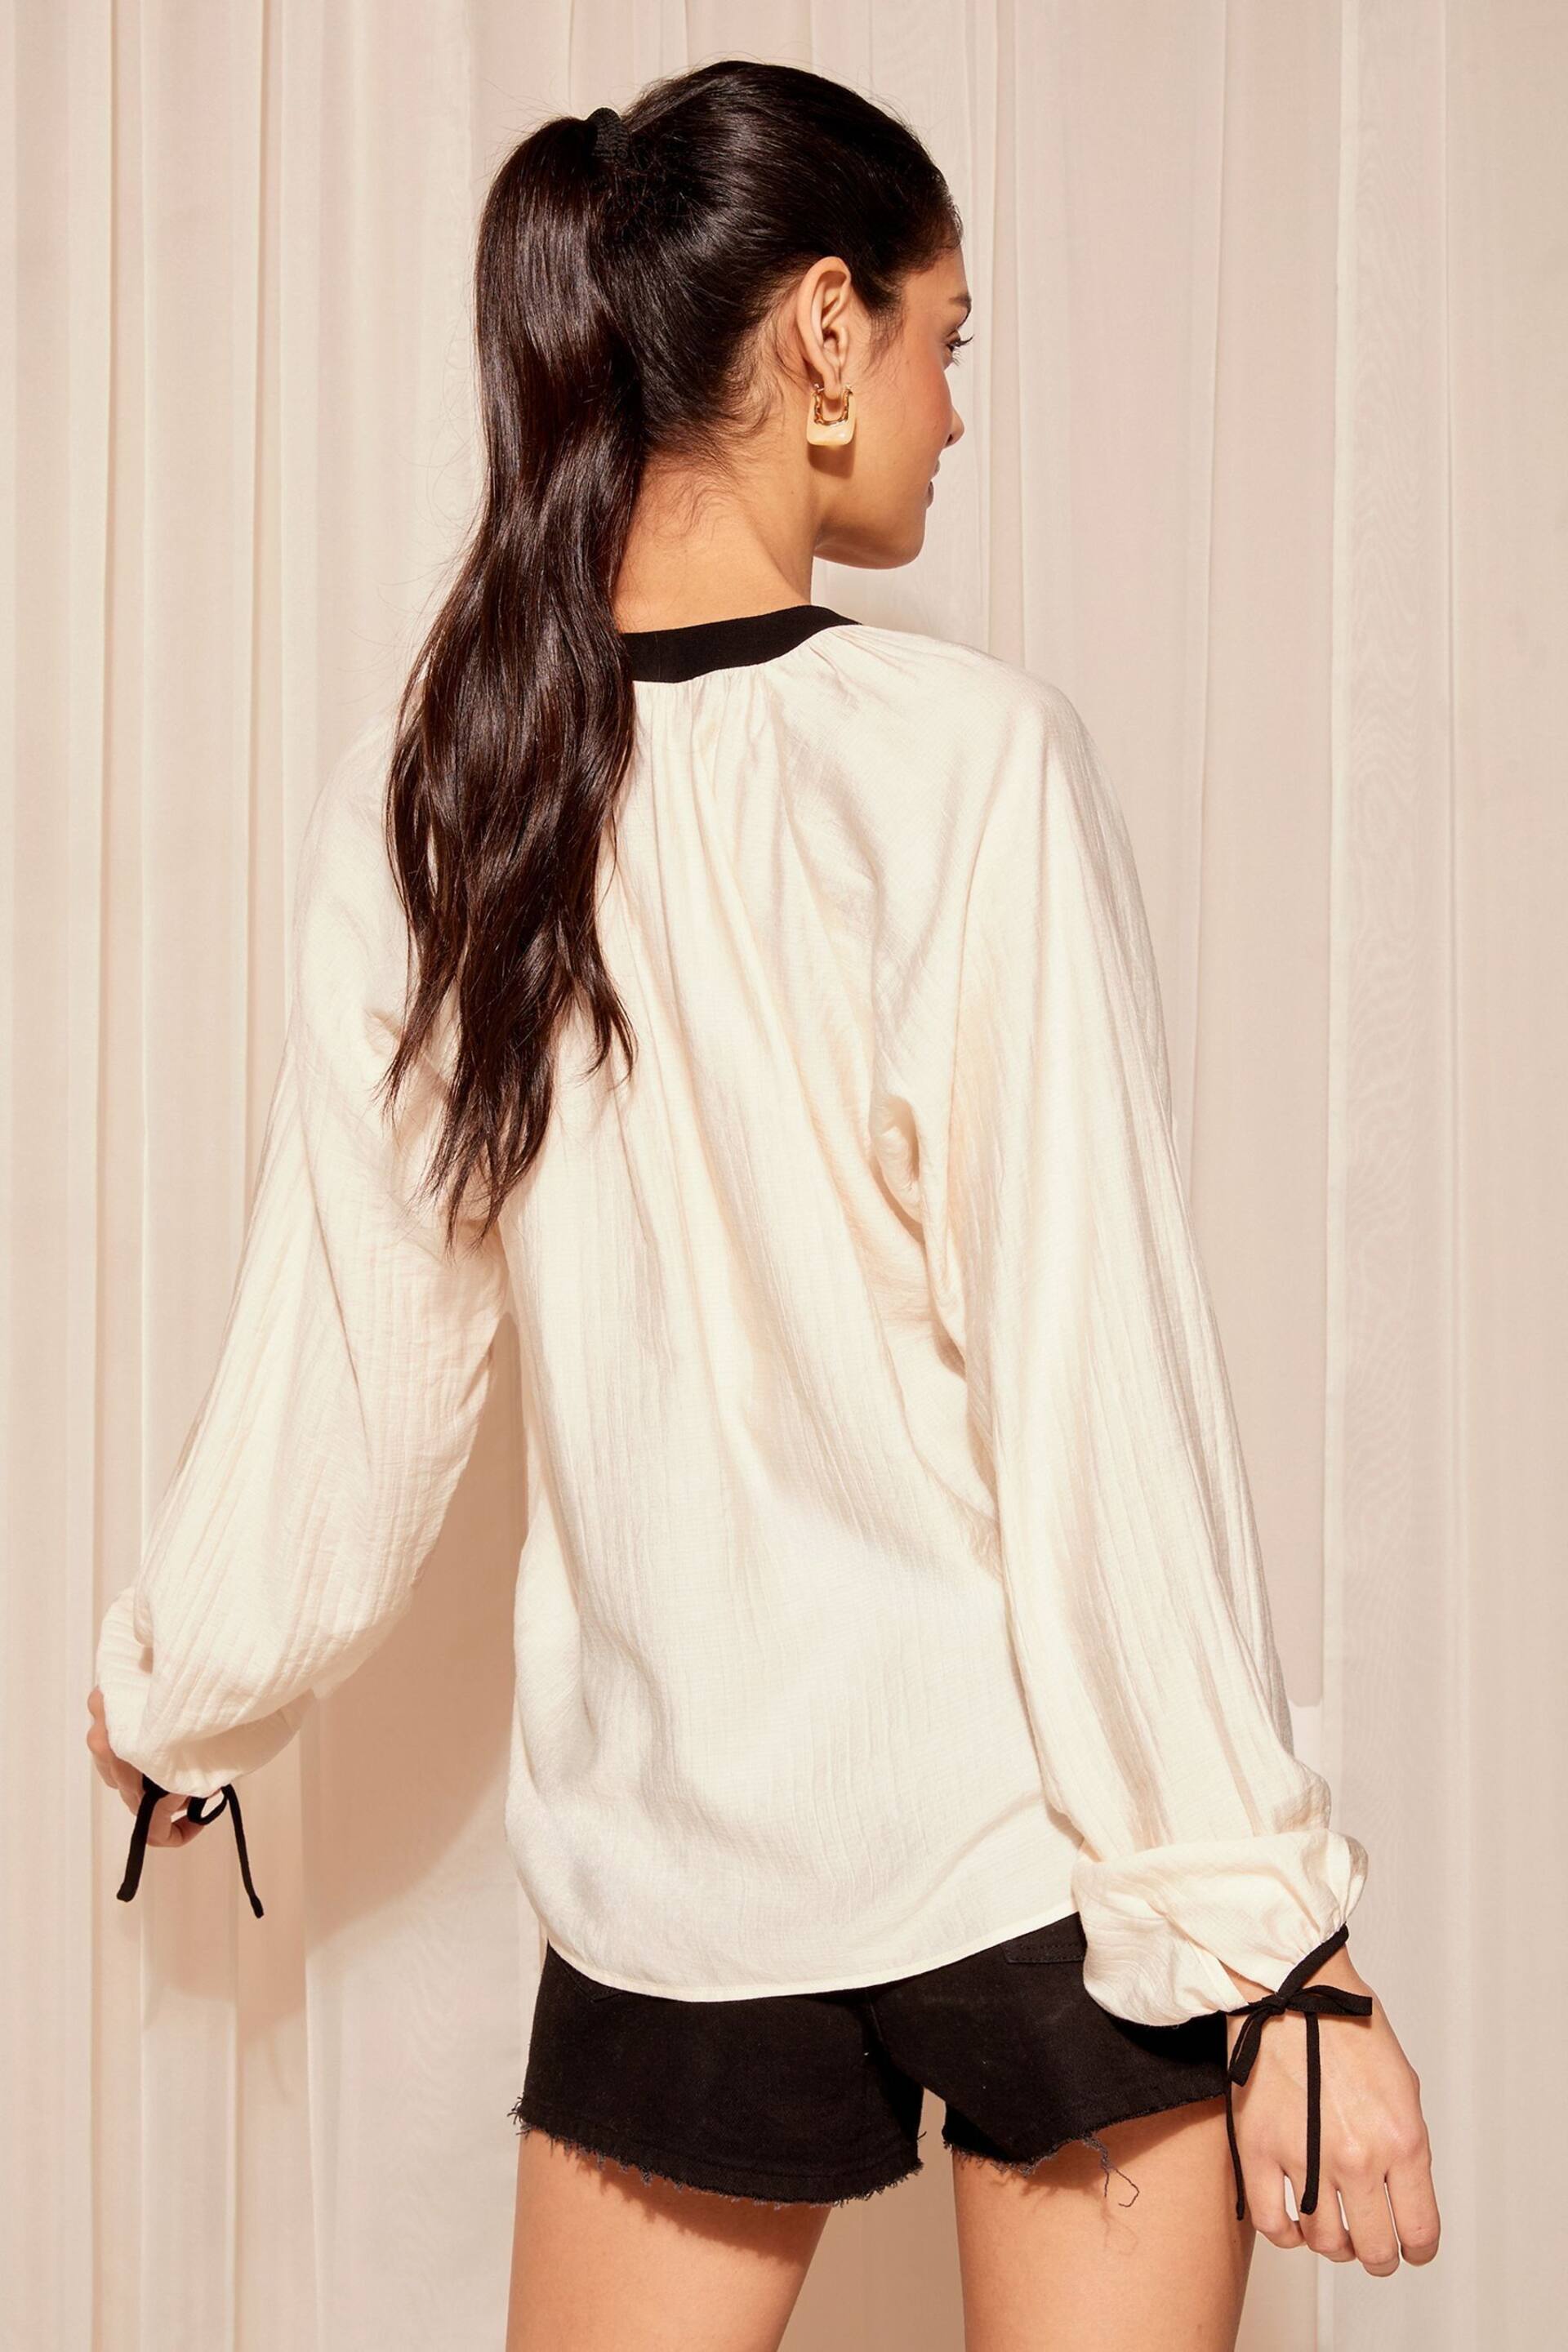 Friends Like These Black/White Long Sleeve Contrast Neck Tie Cuff Blouse - Image 4 of 4